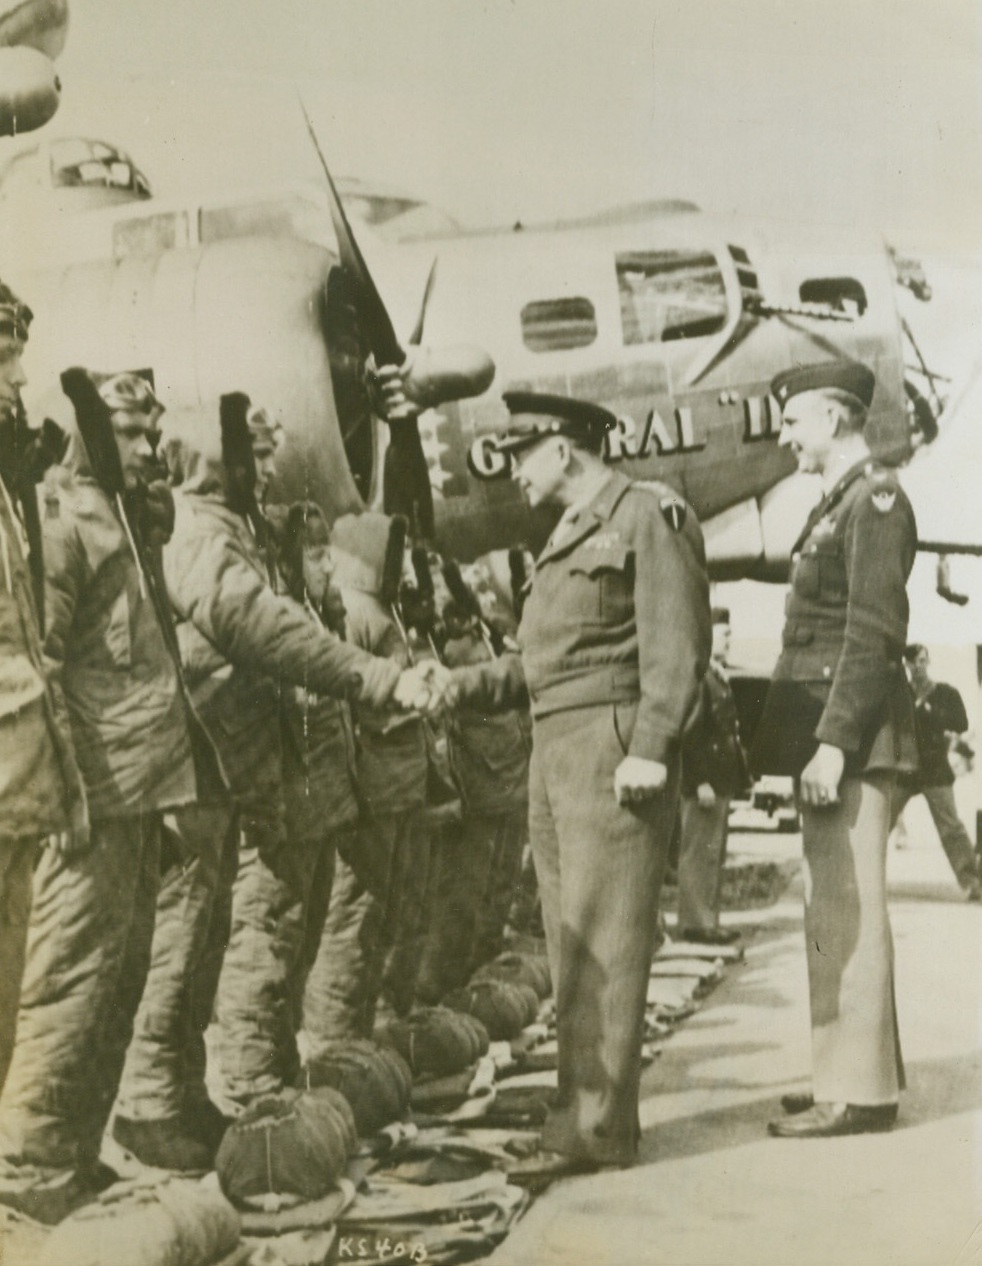 Greets Crew of His Namesake Plane, 4/13/1944. Gen. Dwight Eisenhower, has a grin and a handshake for the crew of "General Ike", newest model B-17 G Silver Flying Fortress, as he christens the ship during an inspection tour of the base. This latest B-17 is unpainted, and thus gains in speed due to less weight and friction loss. To the right of Gen. Eisenhower is Col. Claude E. Putnam, Jacksboro, Texas, group Commanding Officer. Credit (US Army Radiotelephoto from ACME);